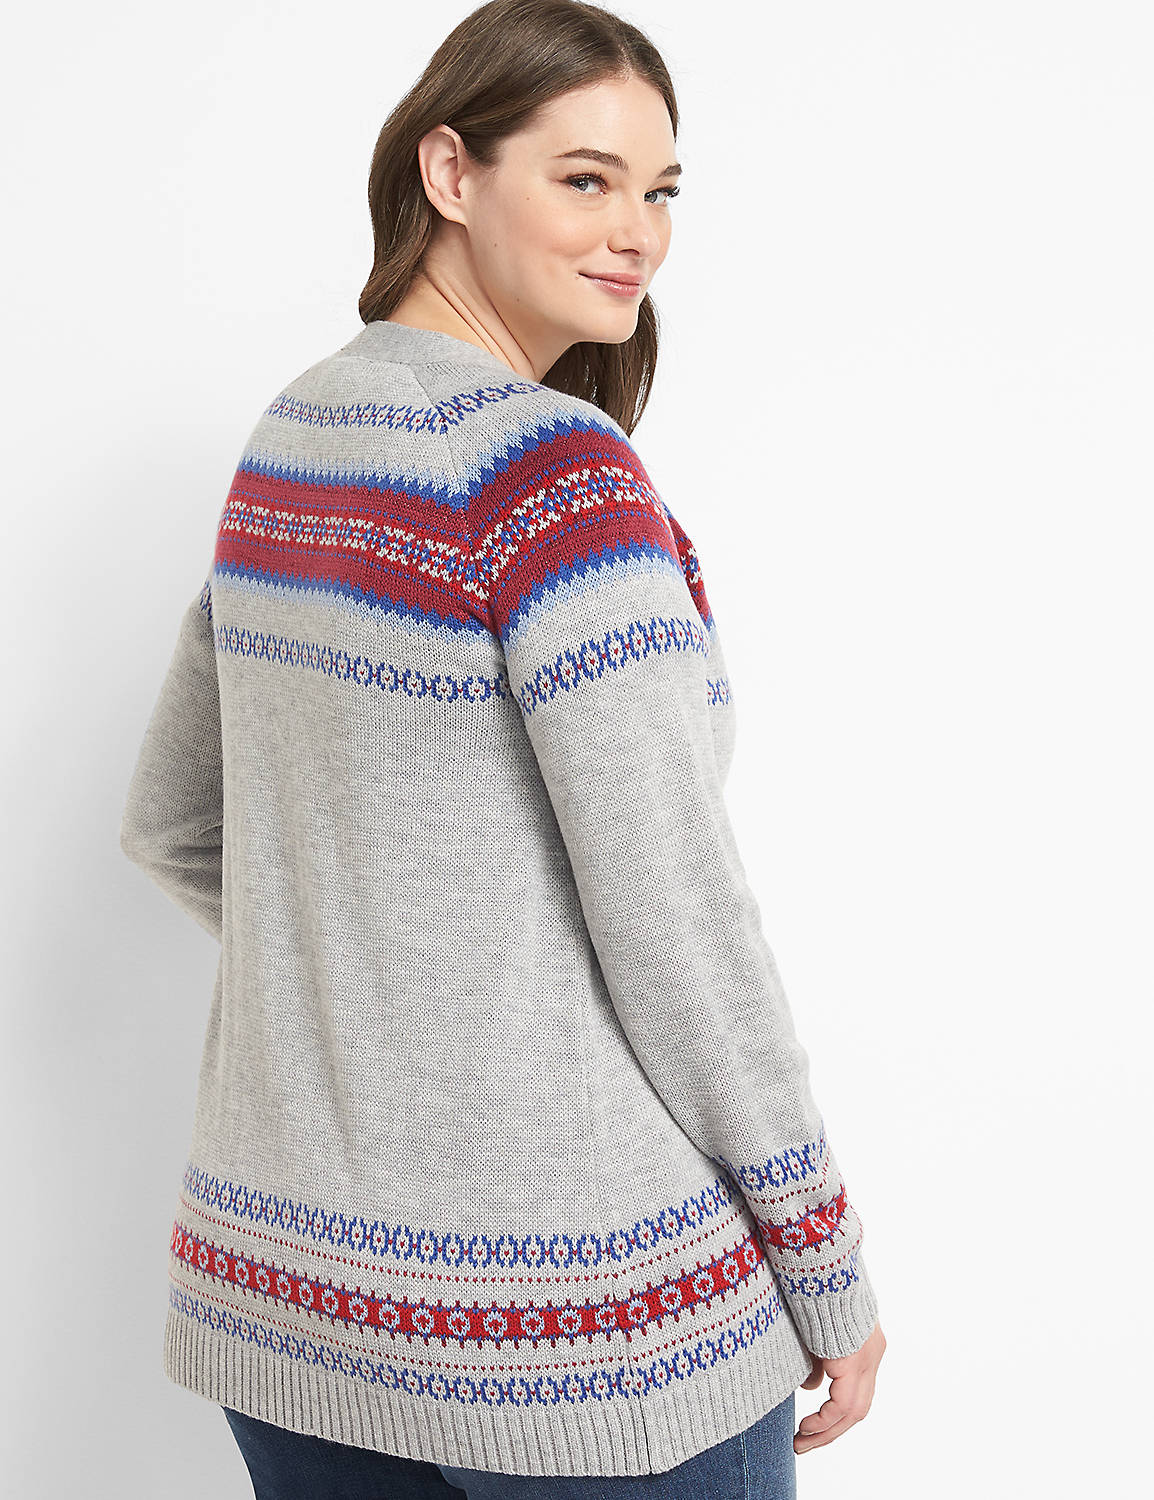 Long Sleeve Open Front Placed Fairisle Overpiece 1124478:BC04 Heather grey:10/12 Product Image 2